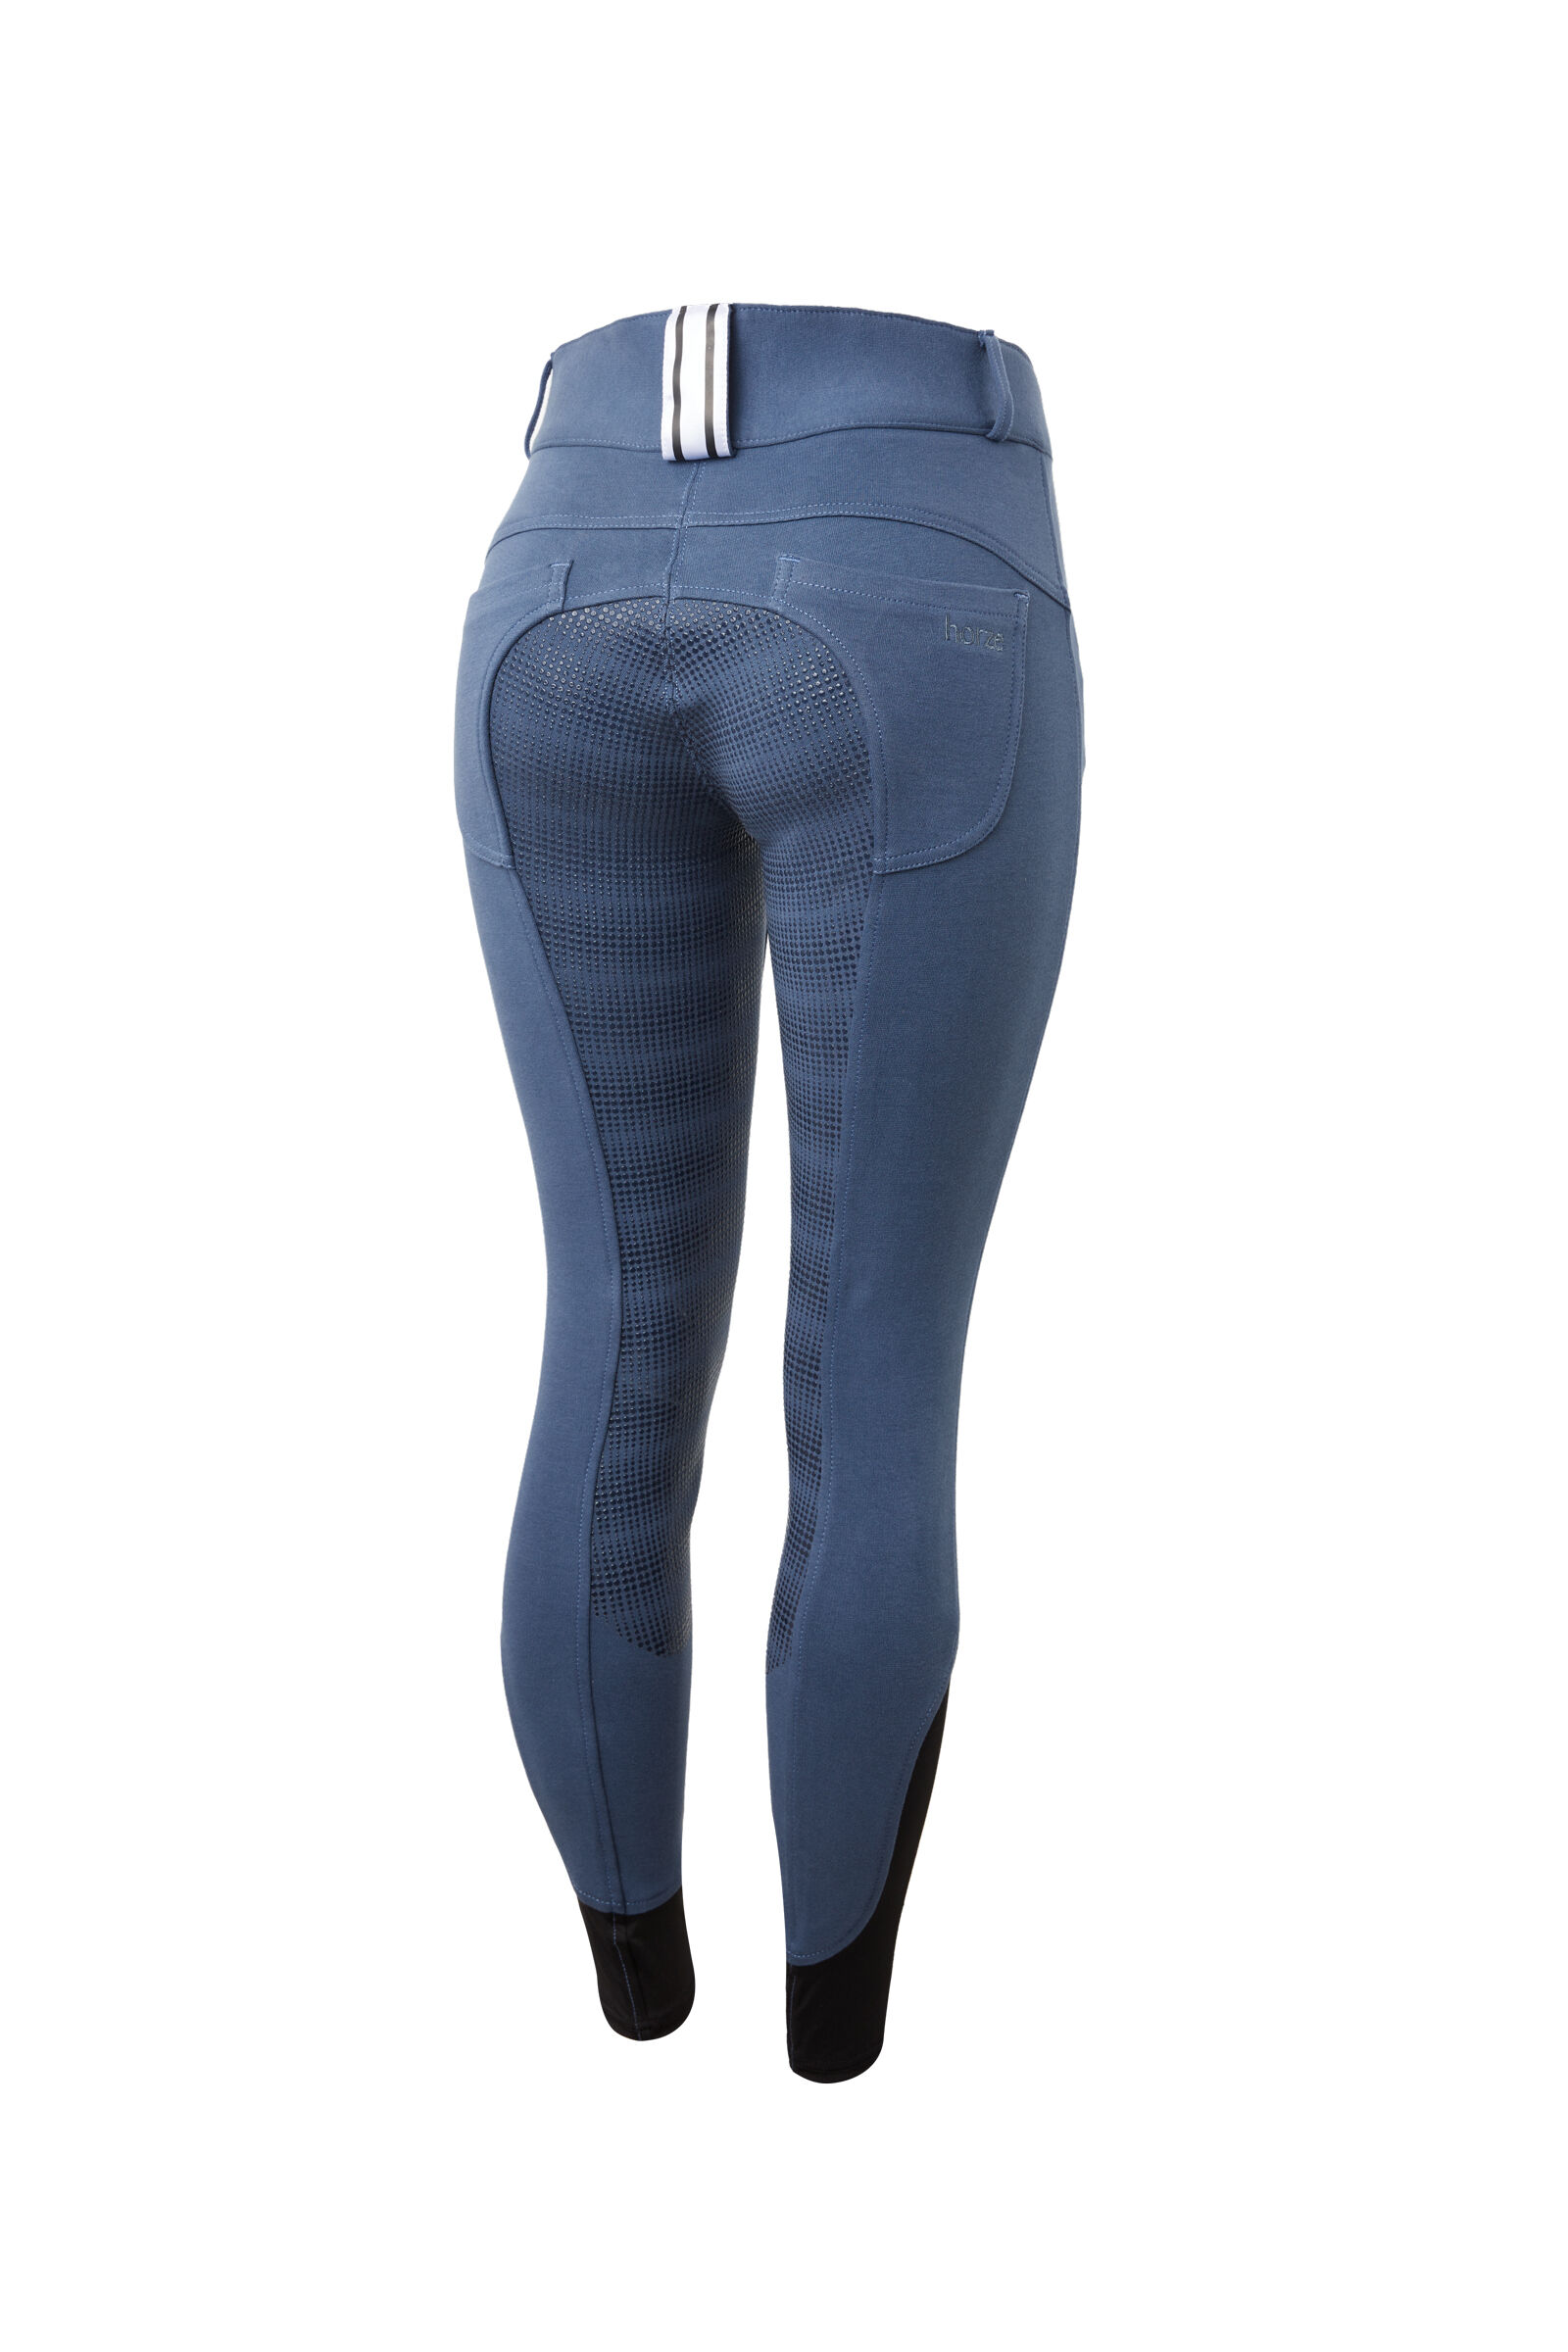 Equitation Horse Riding Pants | Bootcut | Concealed Thigh Pocket - Ride  Proud Clothing